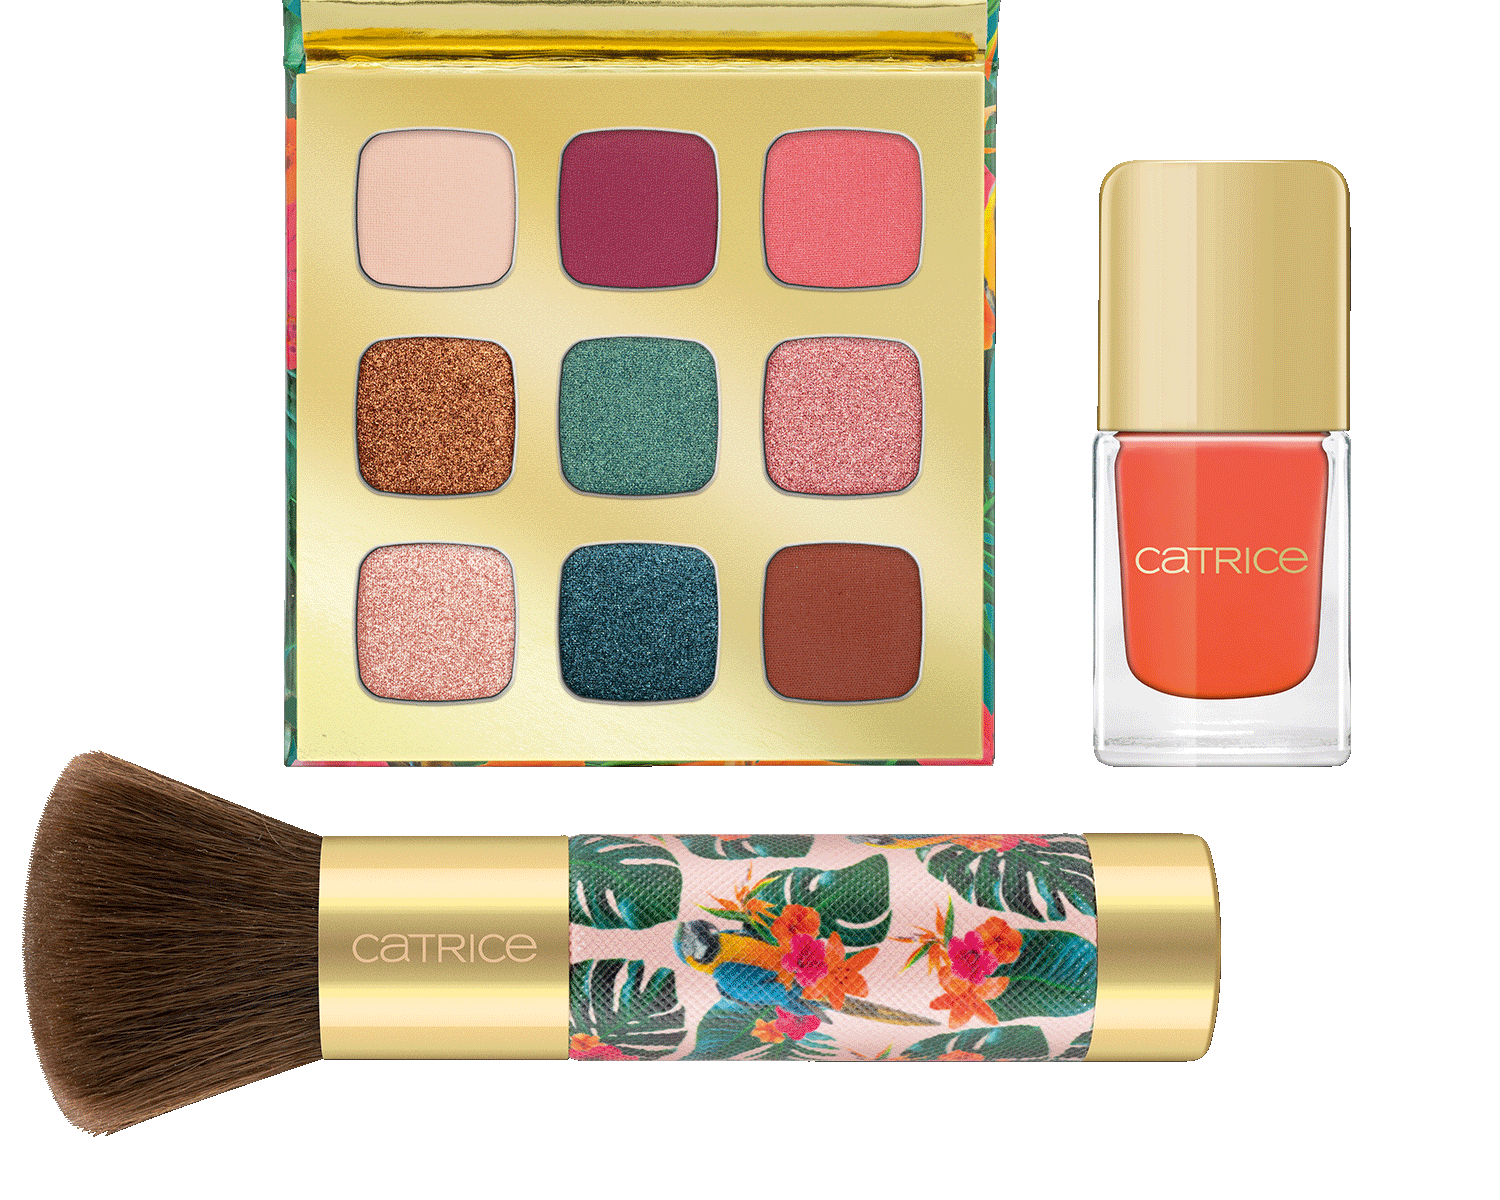 Catrice Tropic Exotic Limited Edition Product